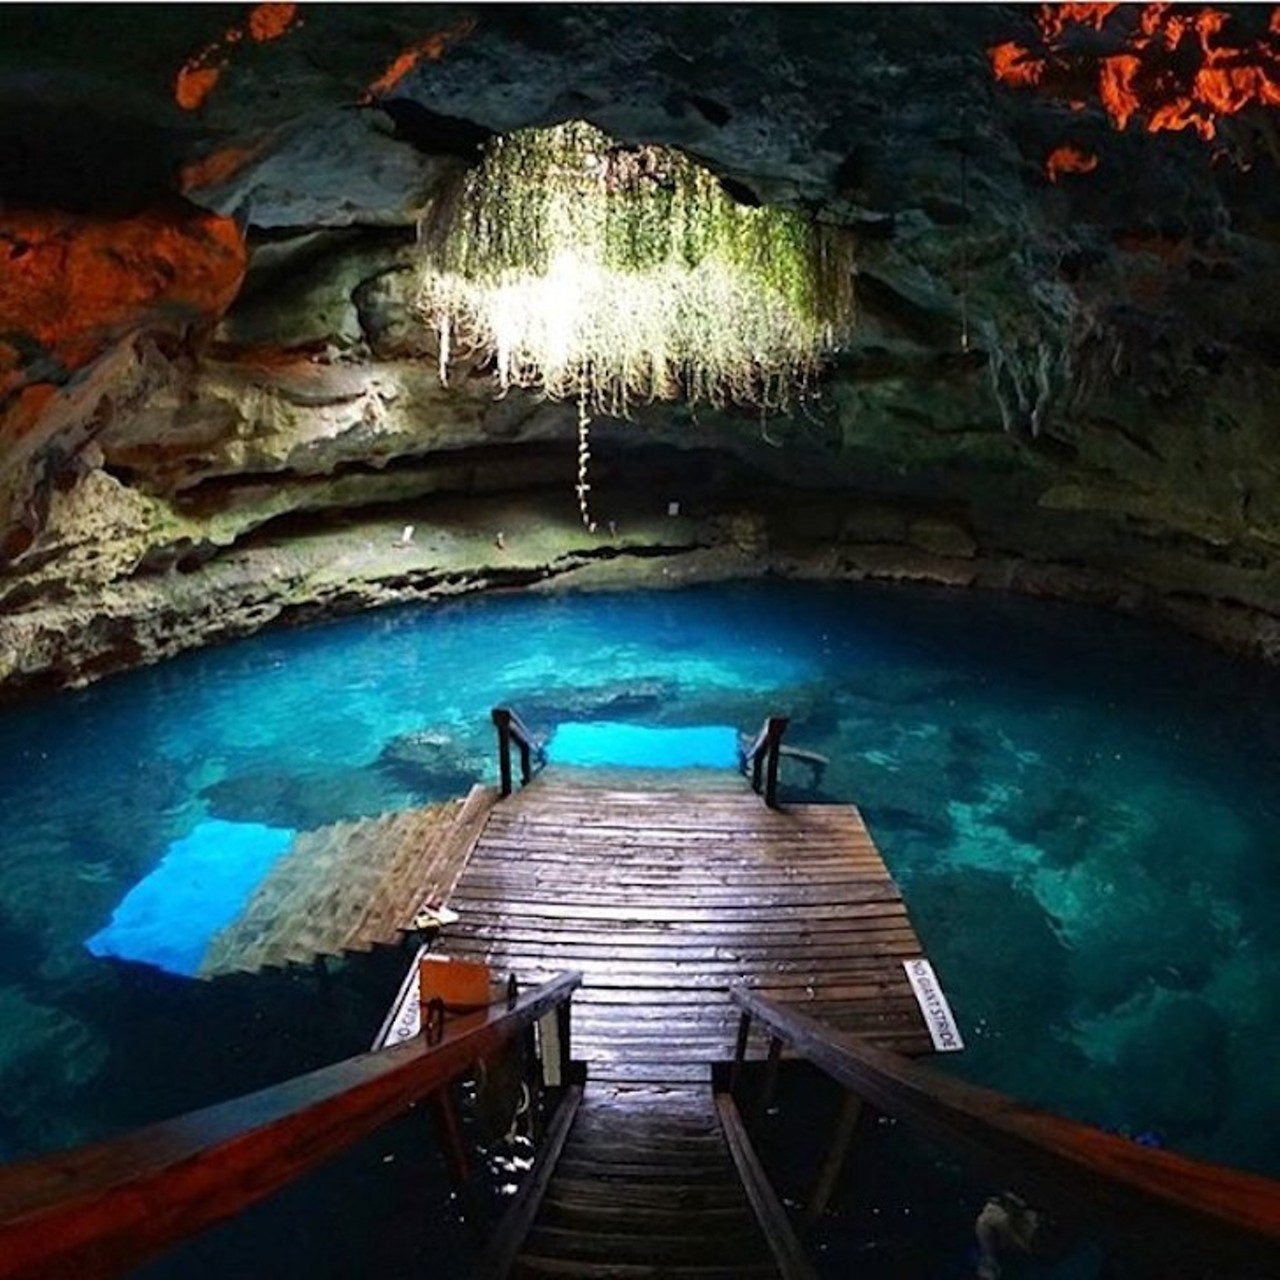 Devil's Den
5390 N.E. 180th Ave, Williston, Fl 32696
1 hour, 31 minutes from Orlando
Pull a Dracula and hide from the sunlight at this underground spring tucked inside a dry cave. Try your hand at some open water and cave diving, and brag to your friends about the stalactites &#151; that&#146;s the pointy things on the ceilings &#151; and 33-million-year-old fossil beds you got to swim around. Don&#146;t make the drive if you&#146;re not scuba- or snorkeling-certified, however, or you won&#146;t be allowed into the spring.
Photo via livelifeinhifi on Instagram